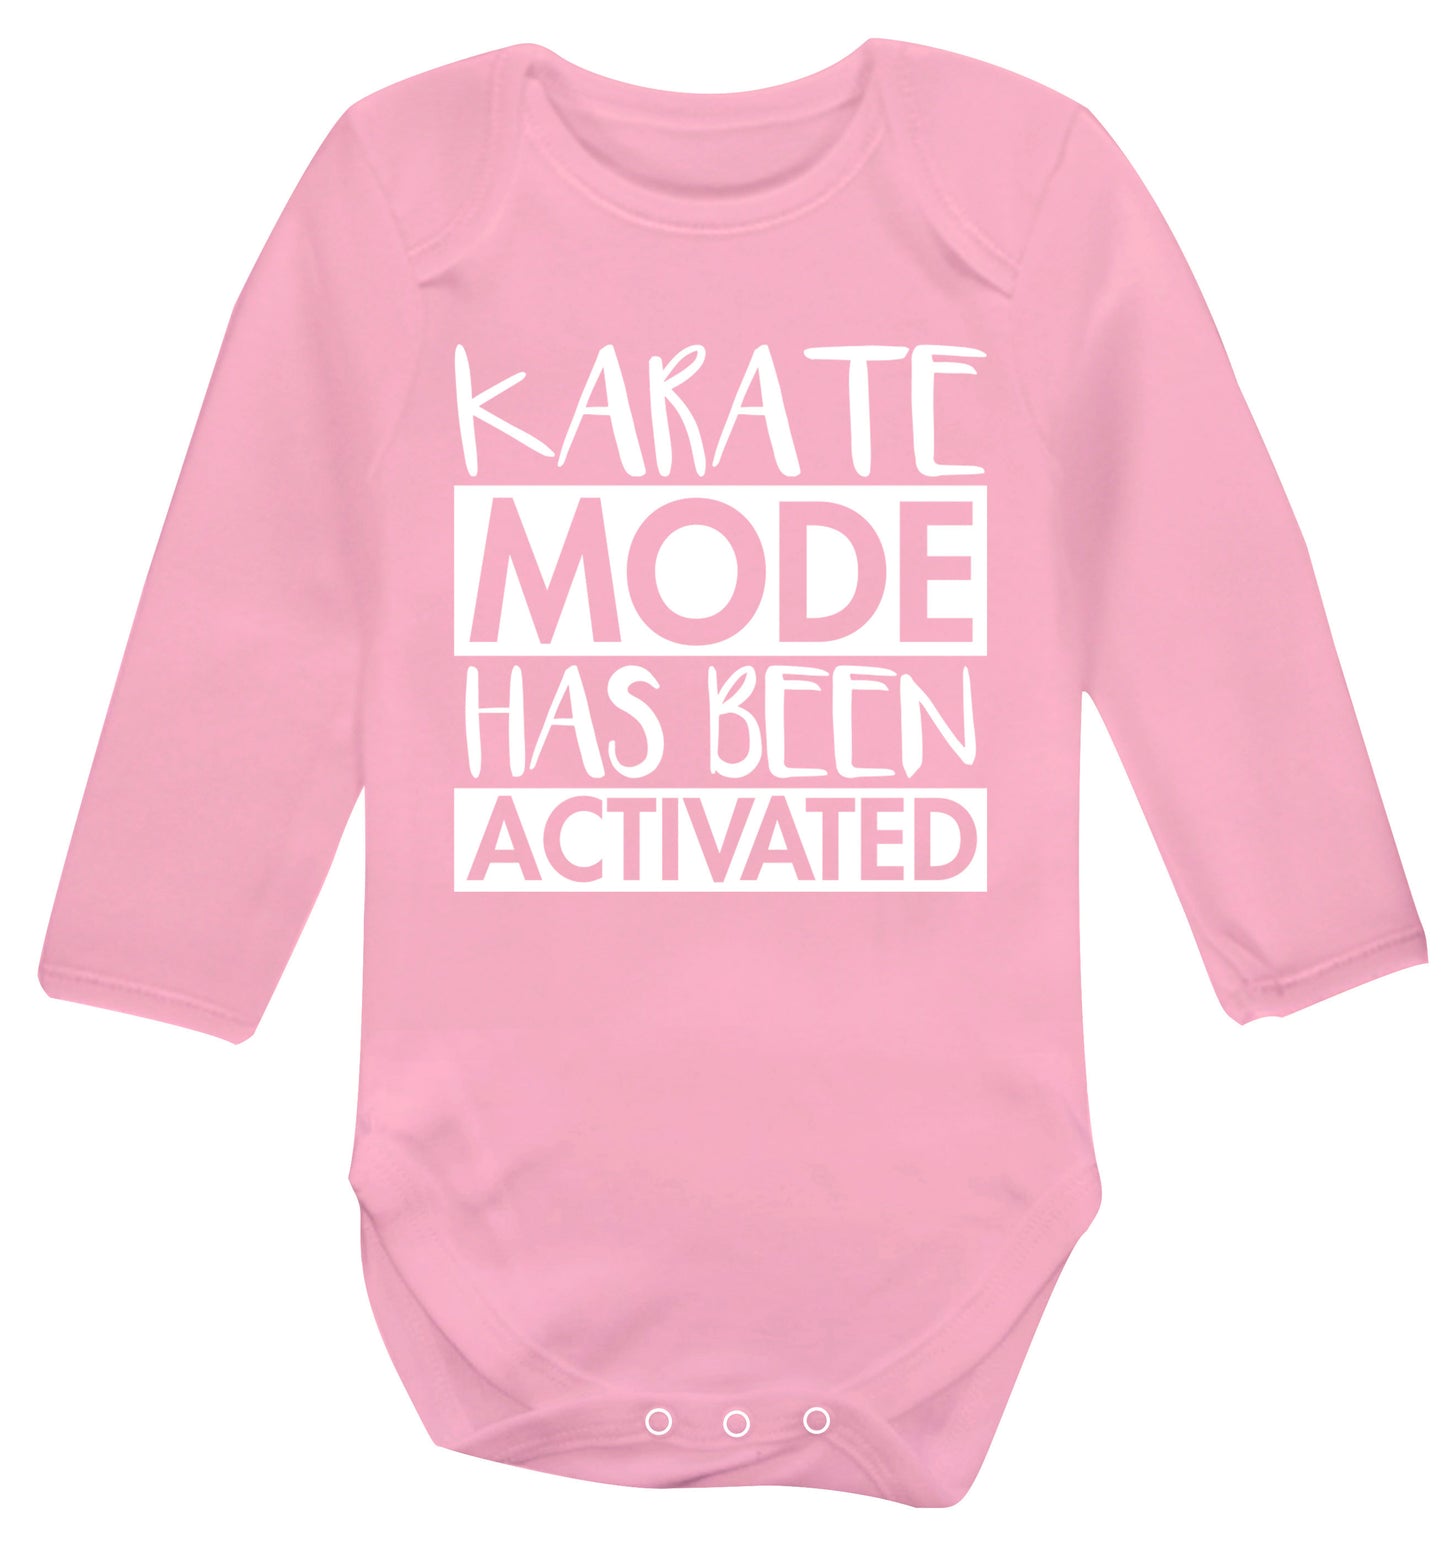 Karate mode activated Baby Vest long sleeved pale pink 6-12 months